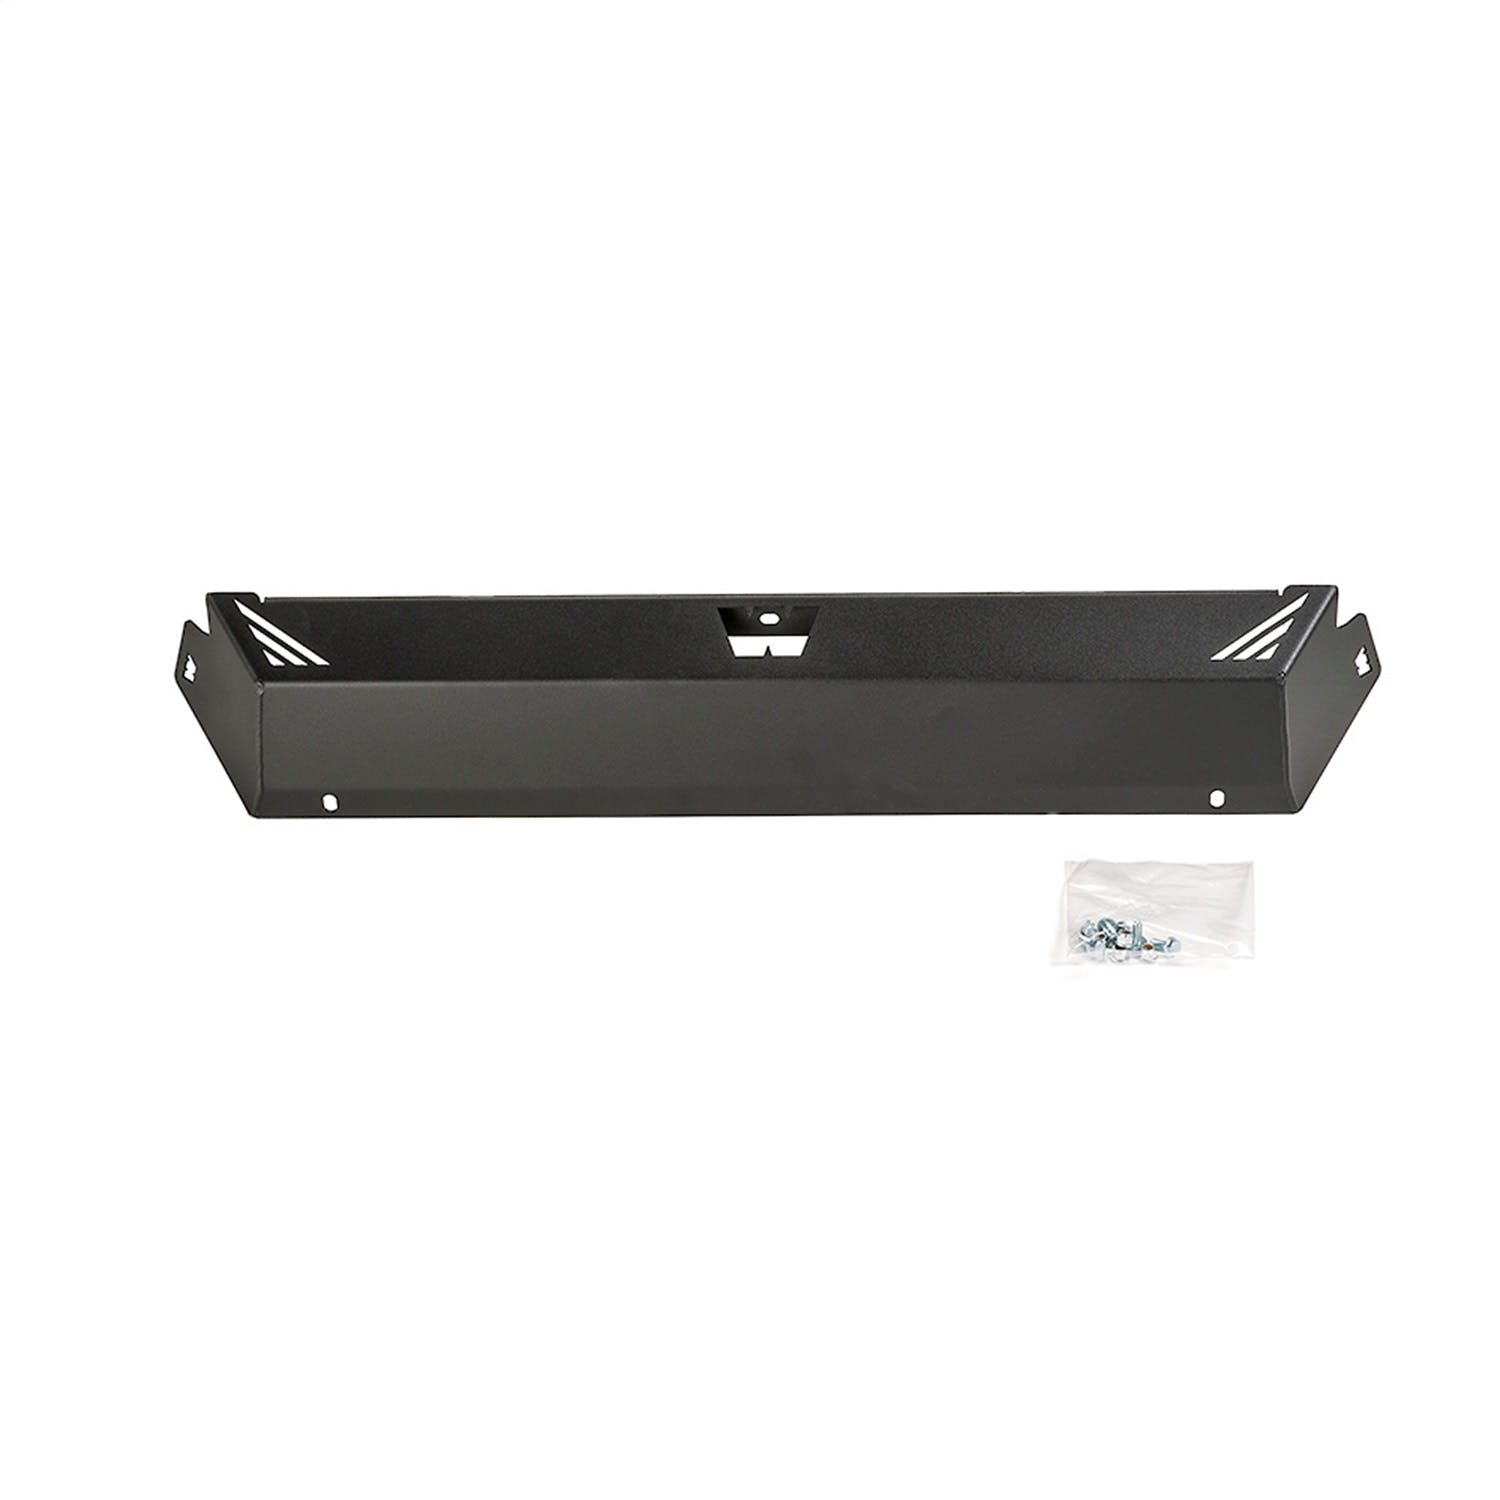 WARN 101445 Optional Skid Plate For All Warn Elite Bumpers